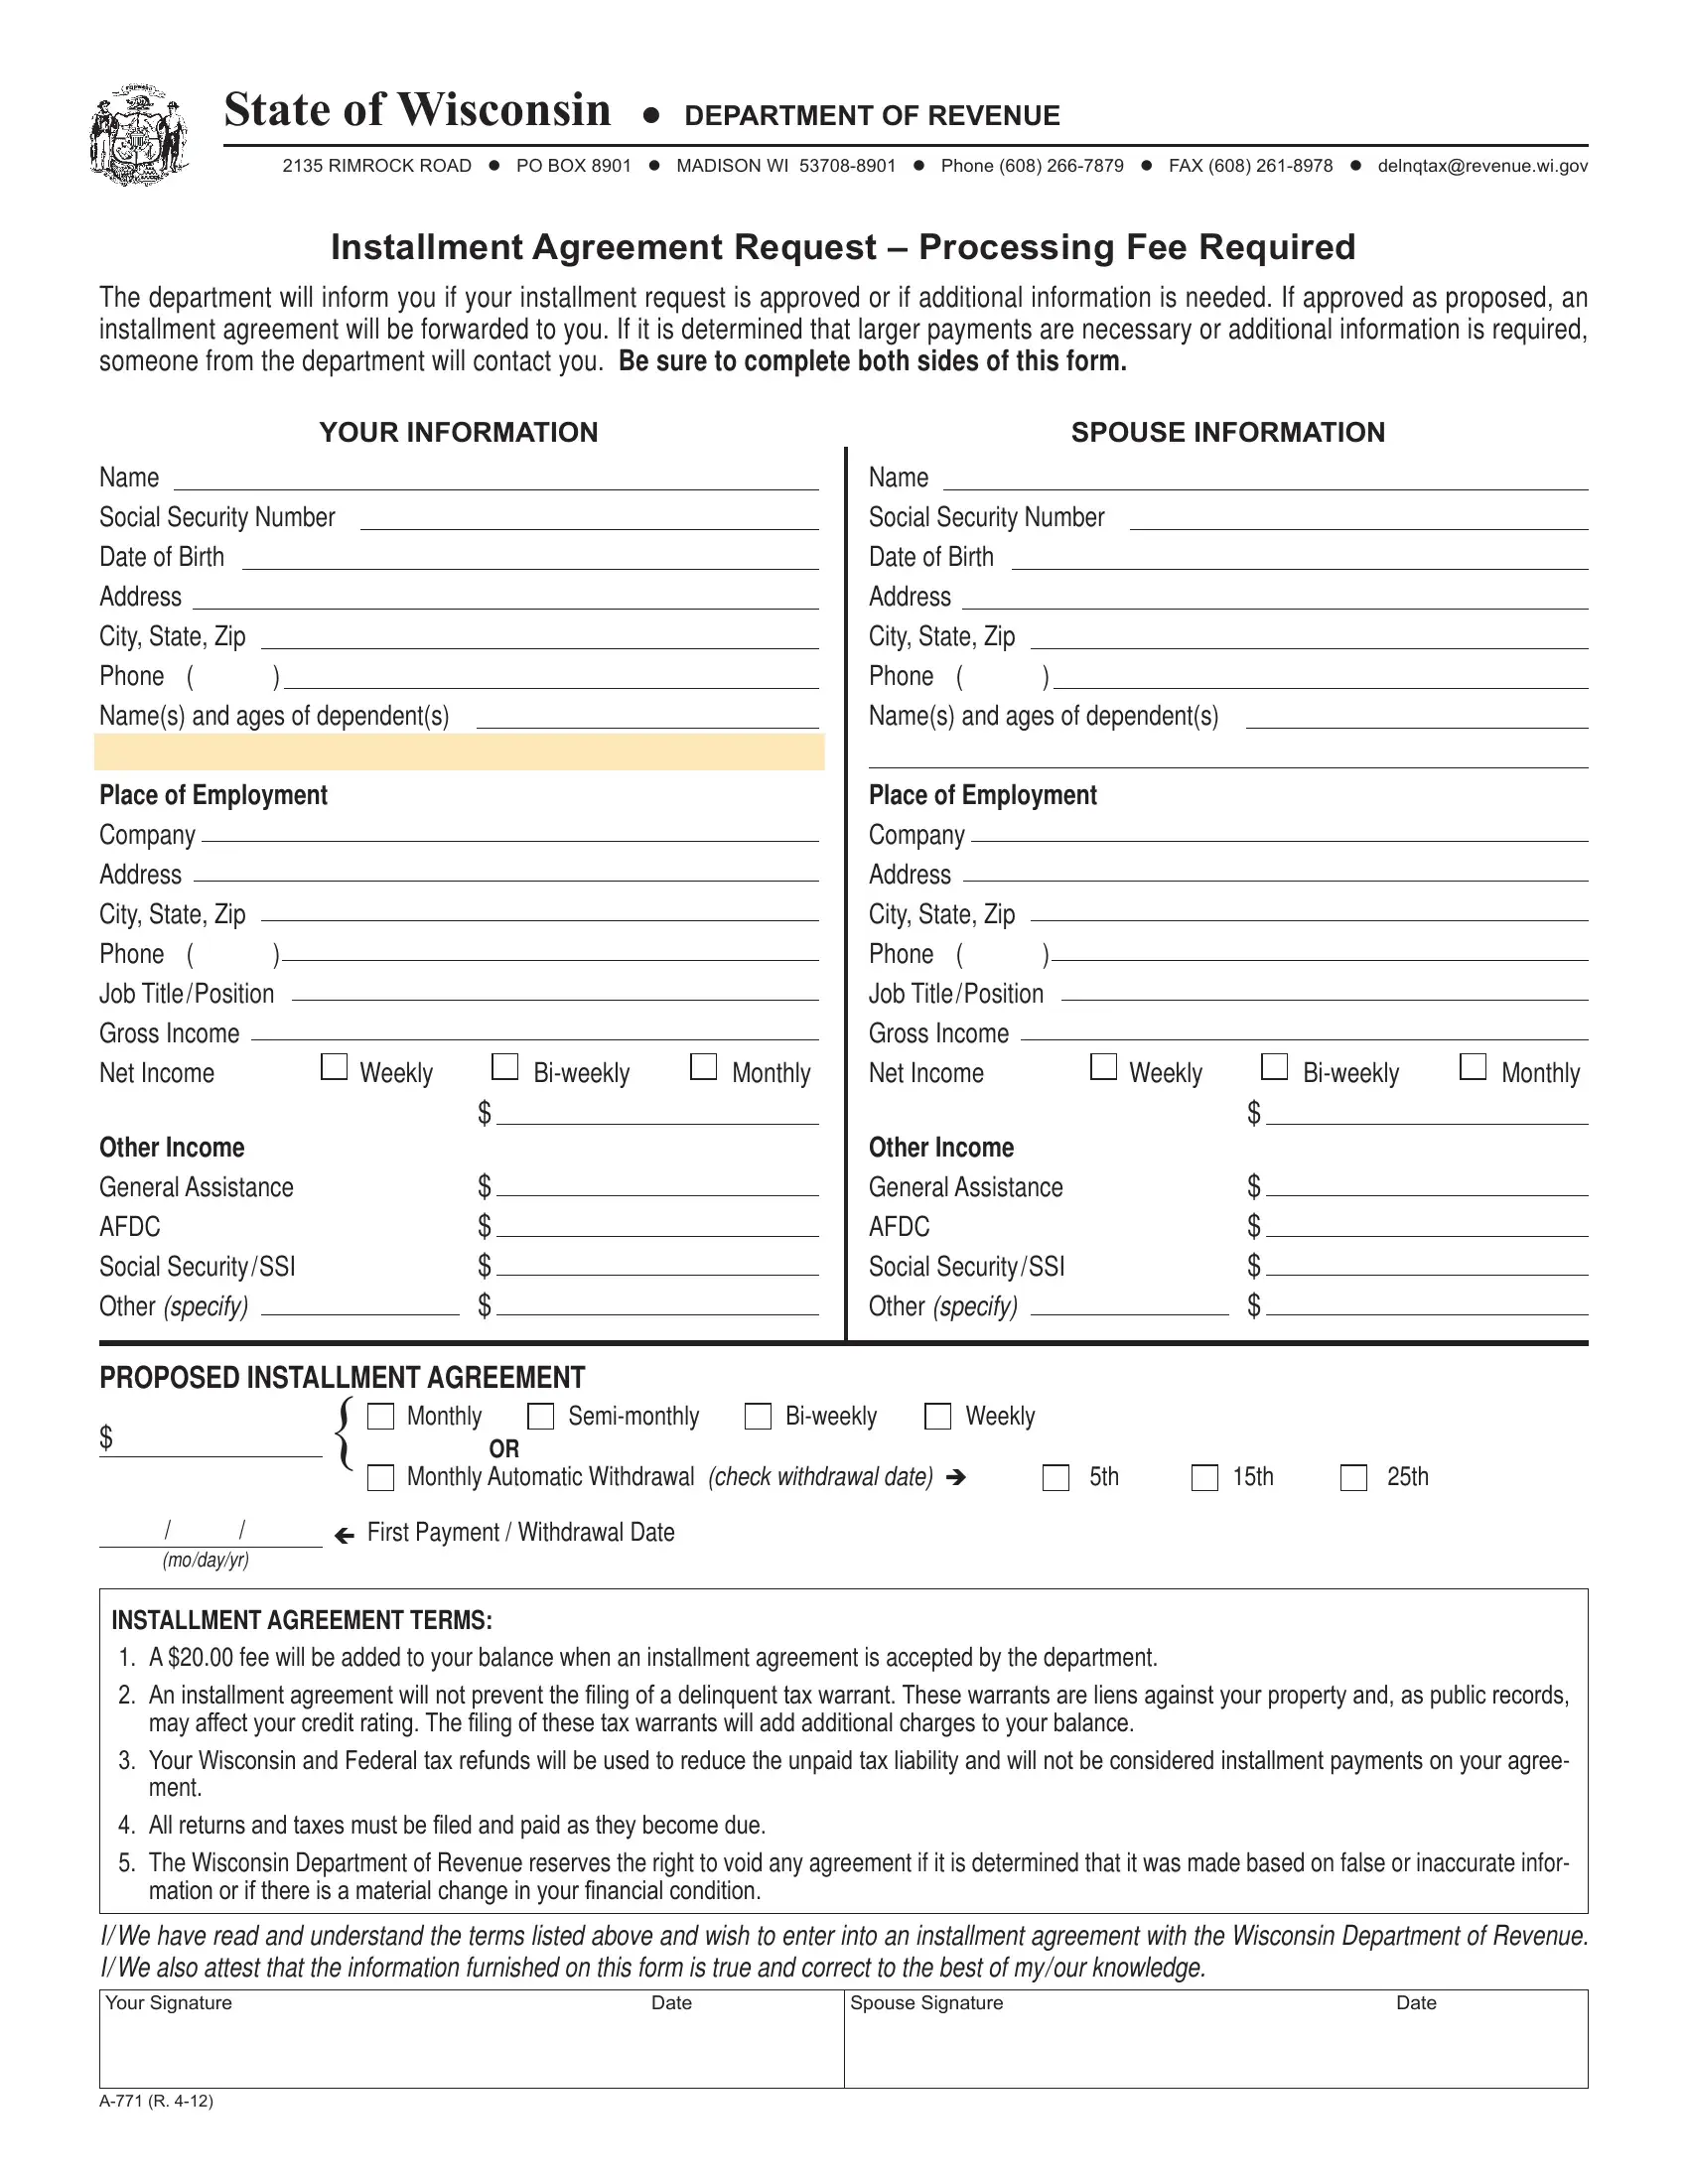 Wisconsin Tax Form A 771 Preview